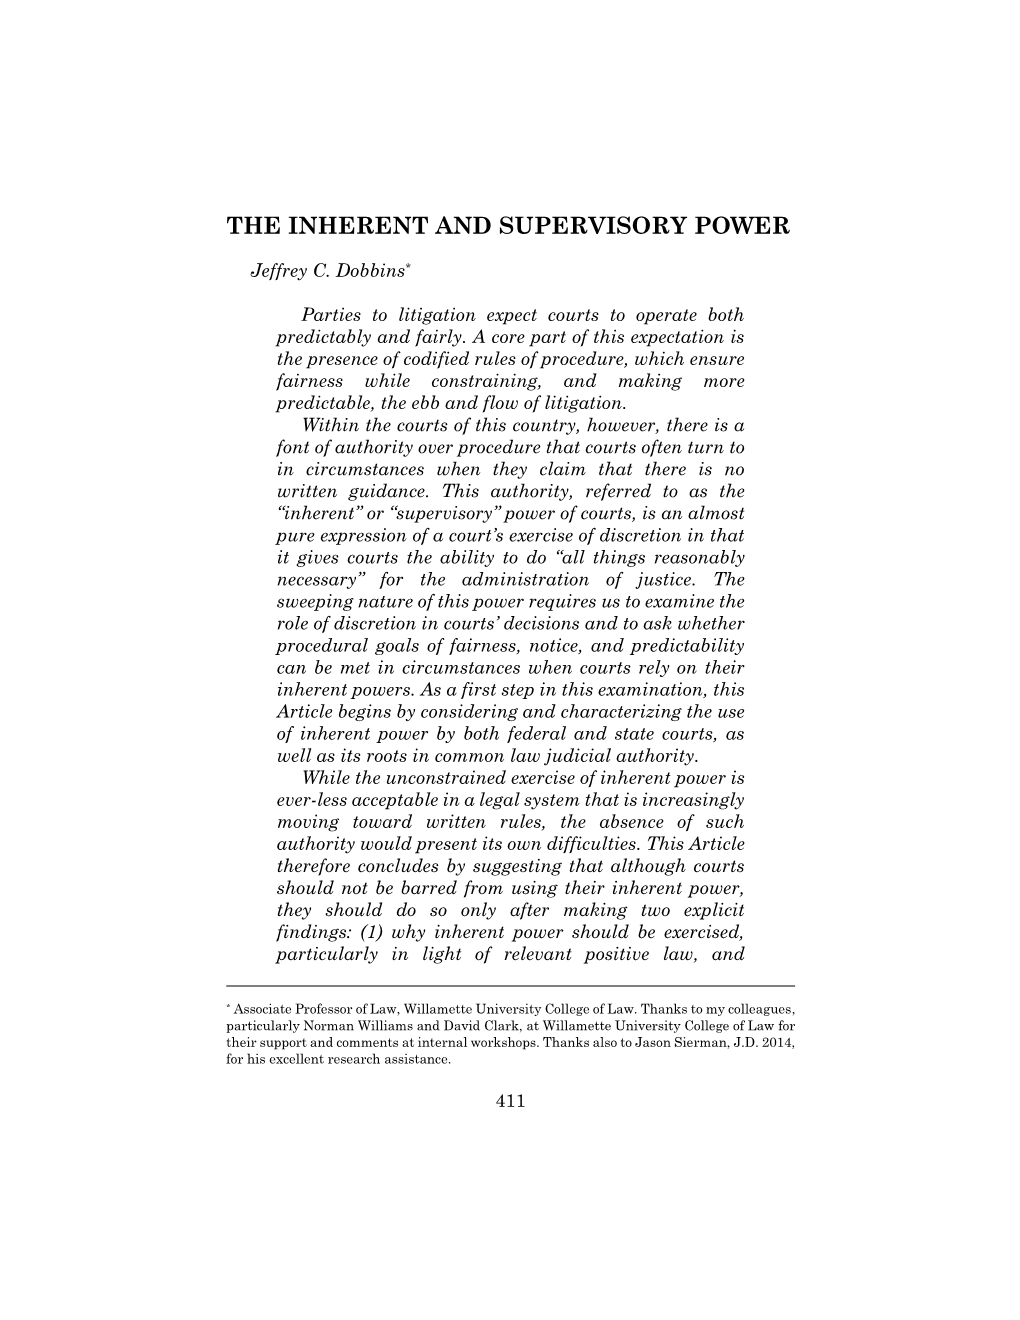 The Inherent and Supervisory Power